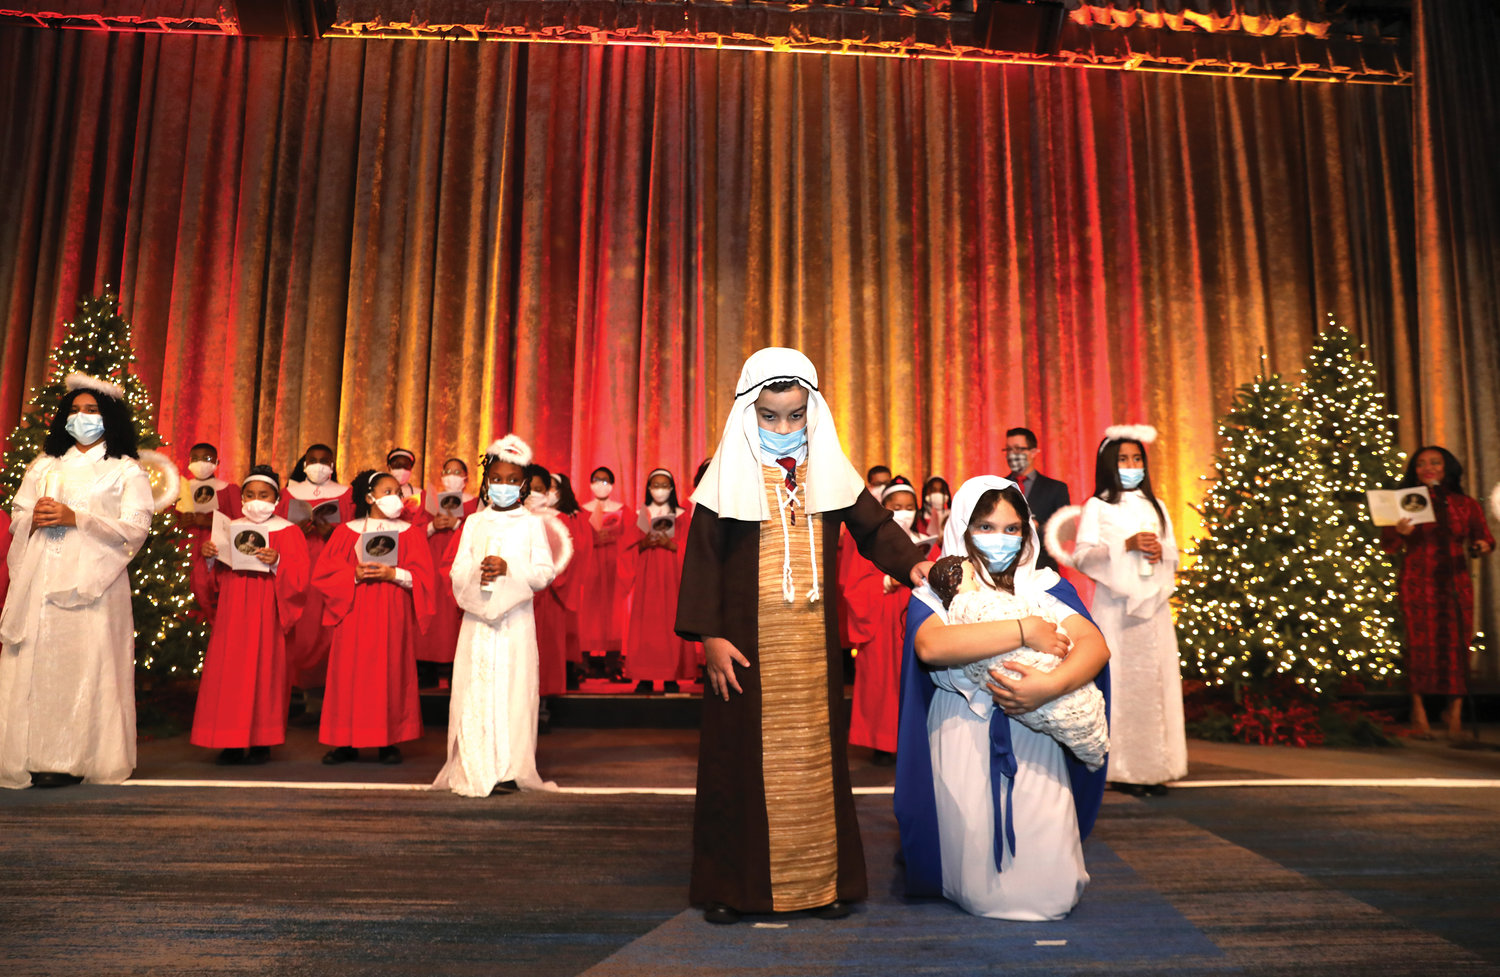 Students of St. John Chrysostom School in the Bronx present the Nativity tableau backed by the choir from St. Raymond’s School in the Bronx.